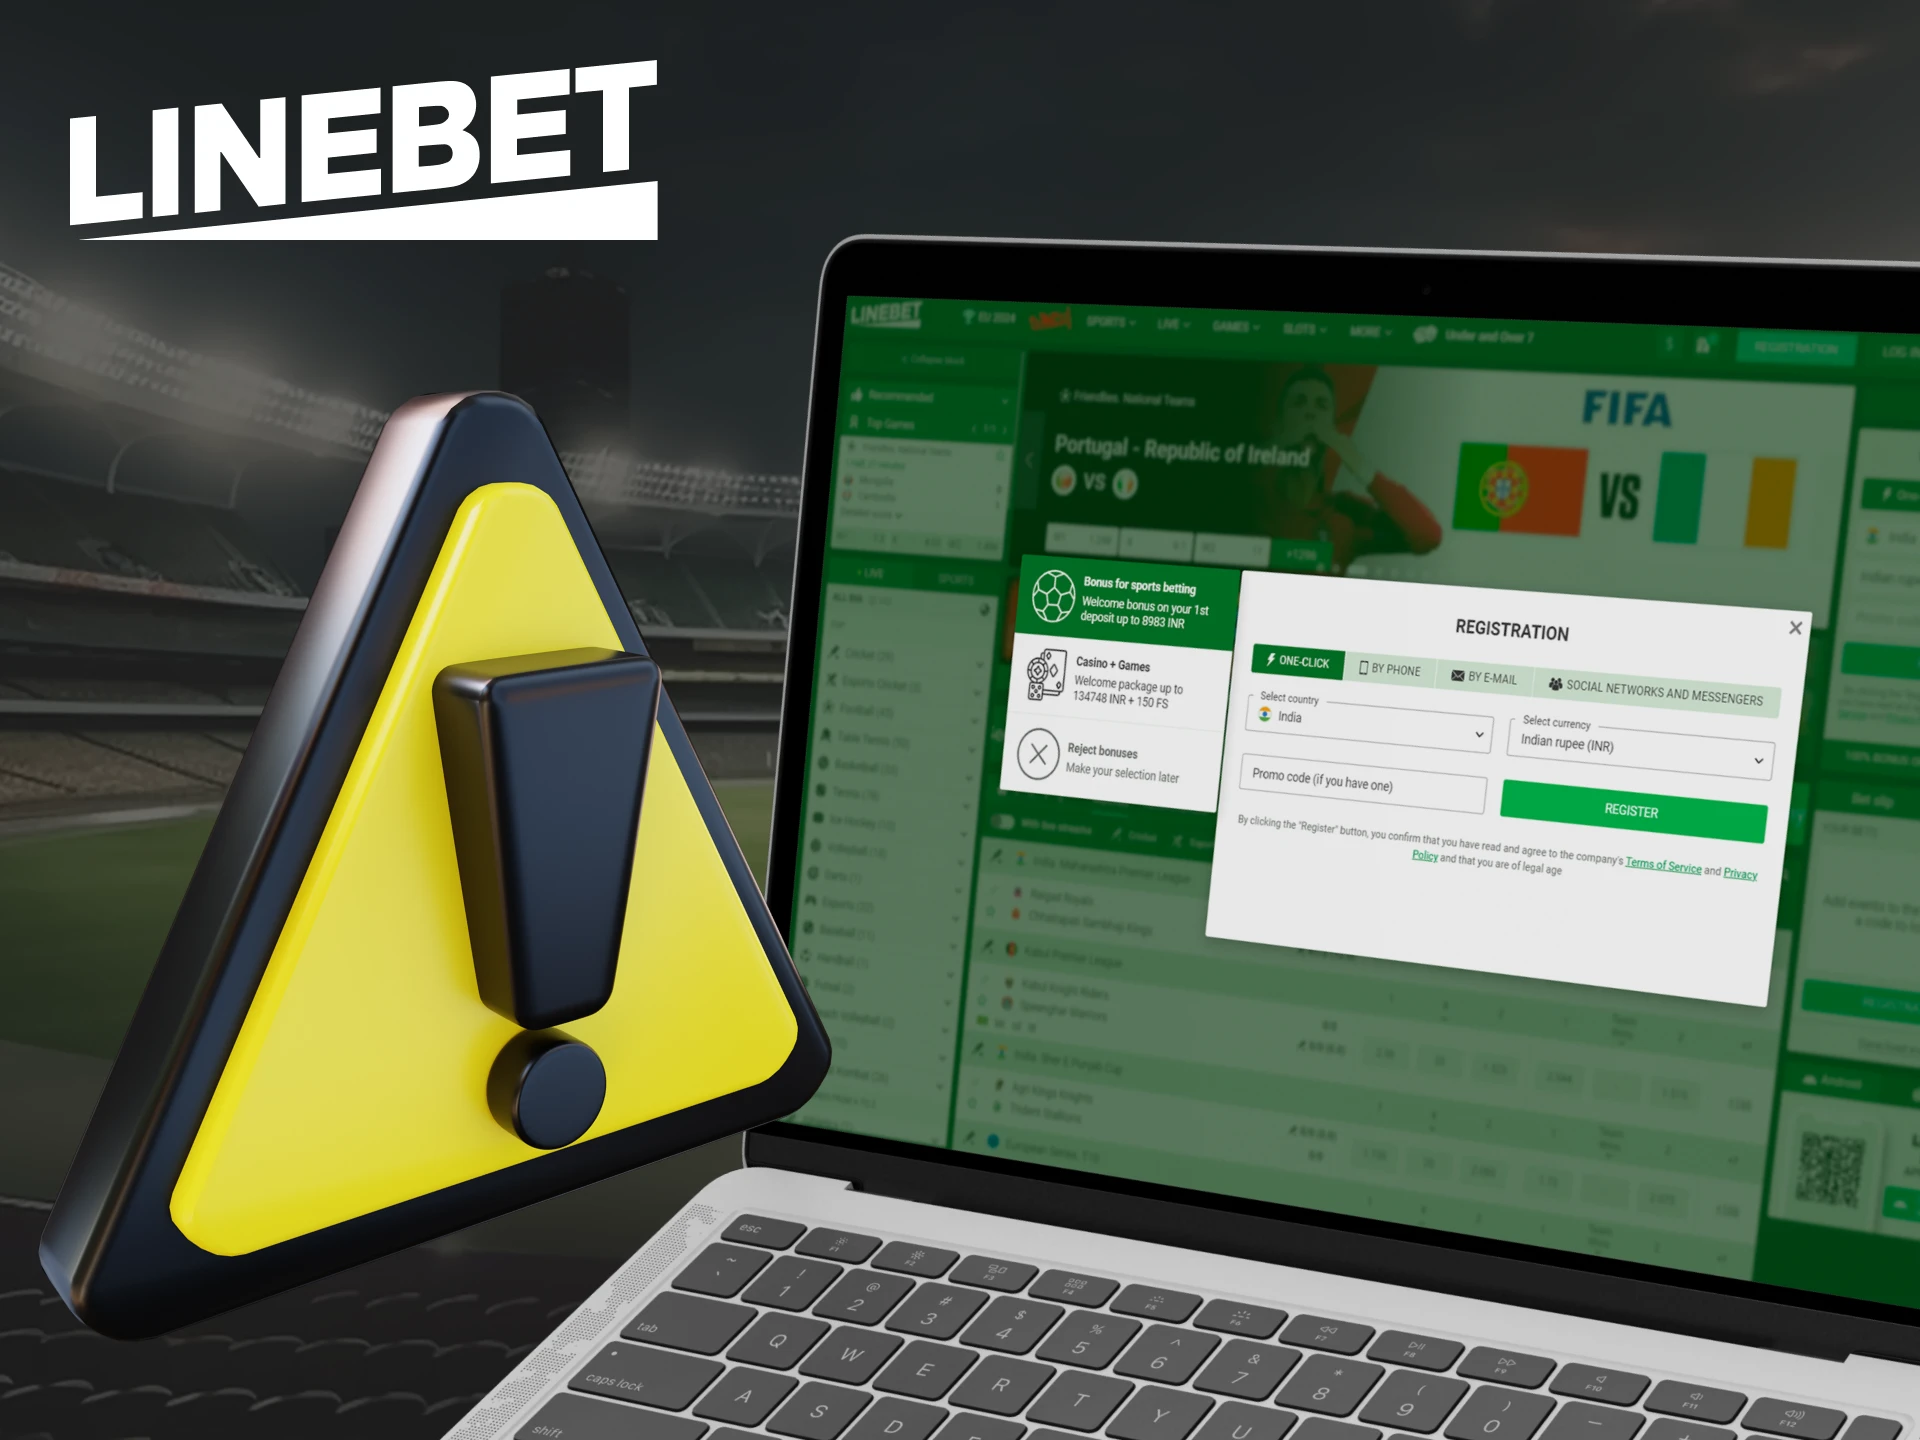 There is a small risk of encountering problems when registering with Linebet.